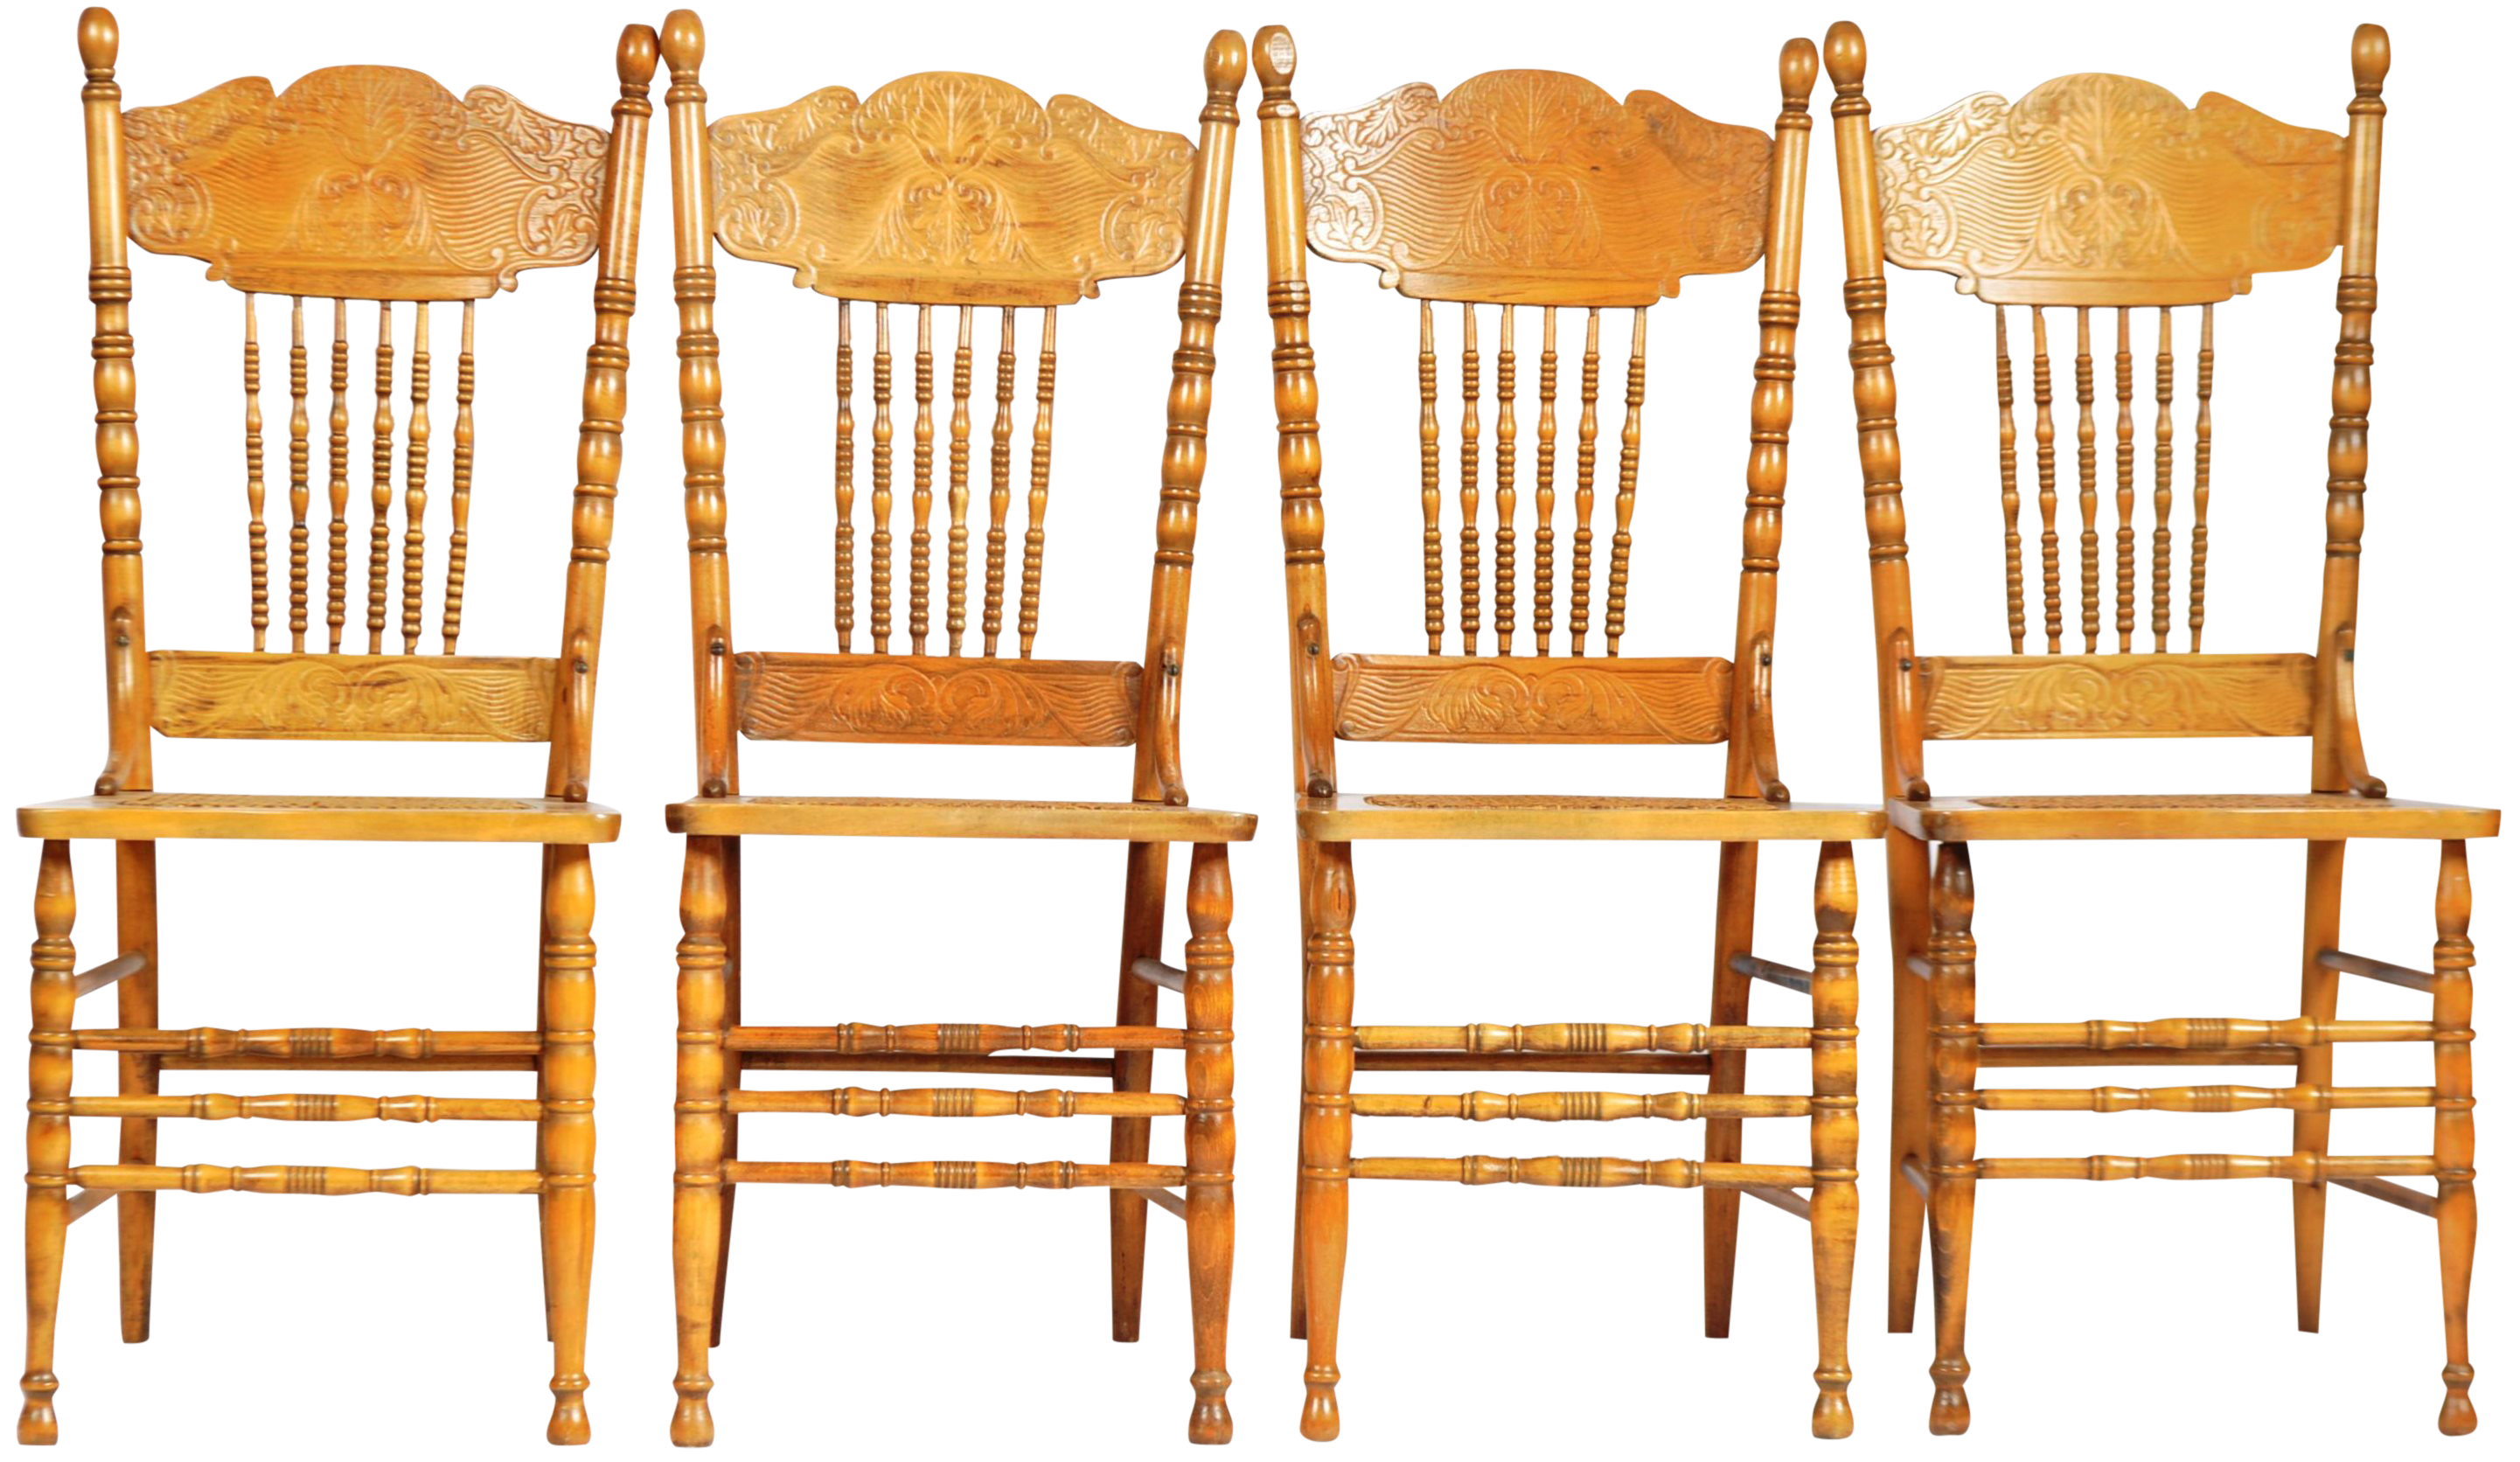 SET OF 12 EARLY 20TH CENTURY AMERICAN LARKIN PRESS BACK DINING CHAIRS - Image 2 of 8